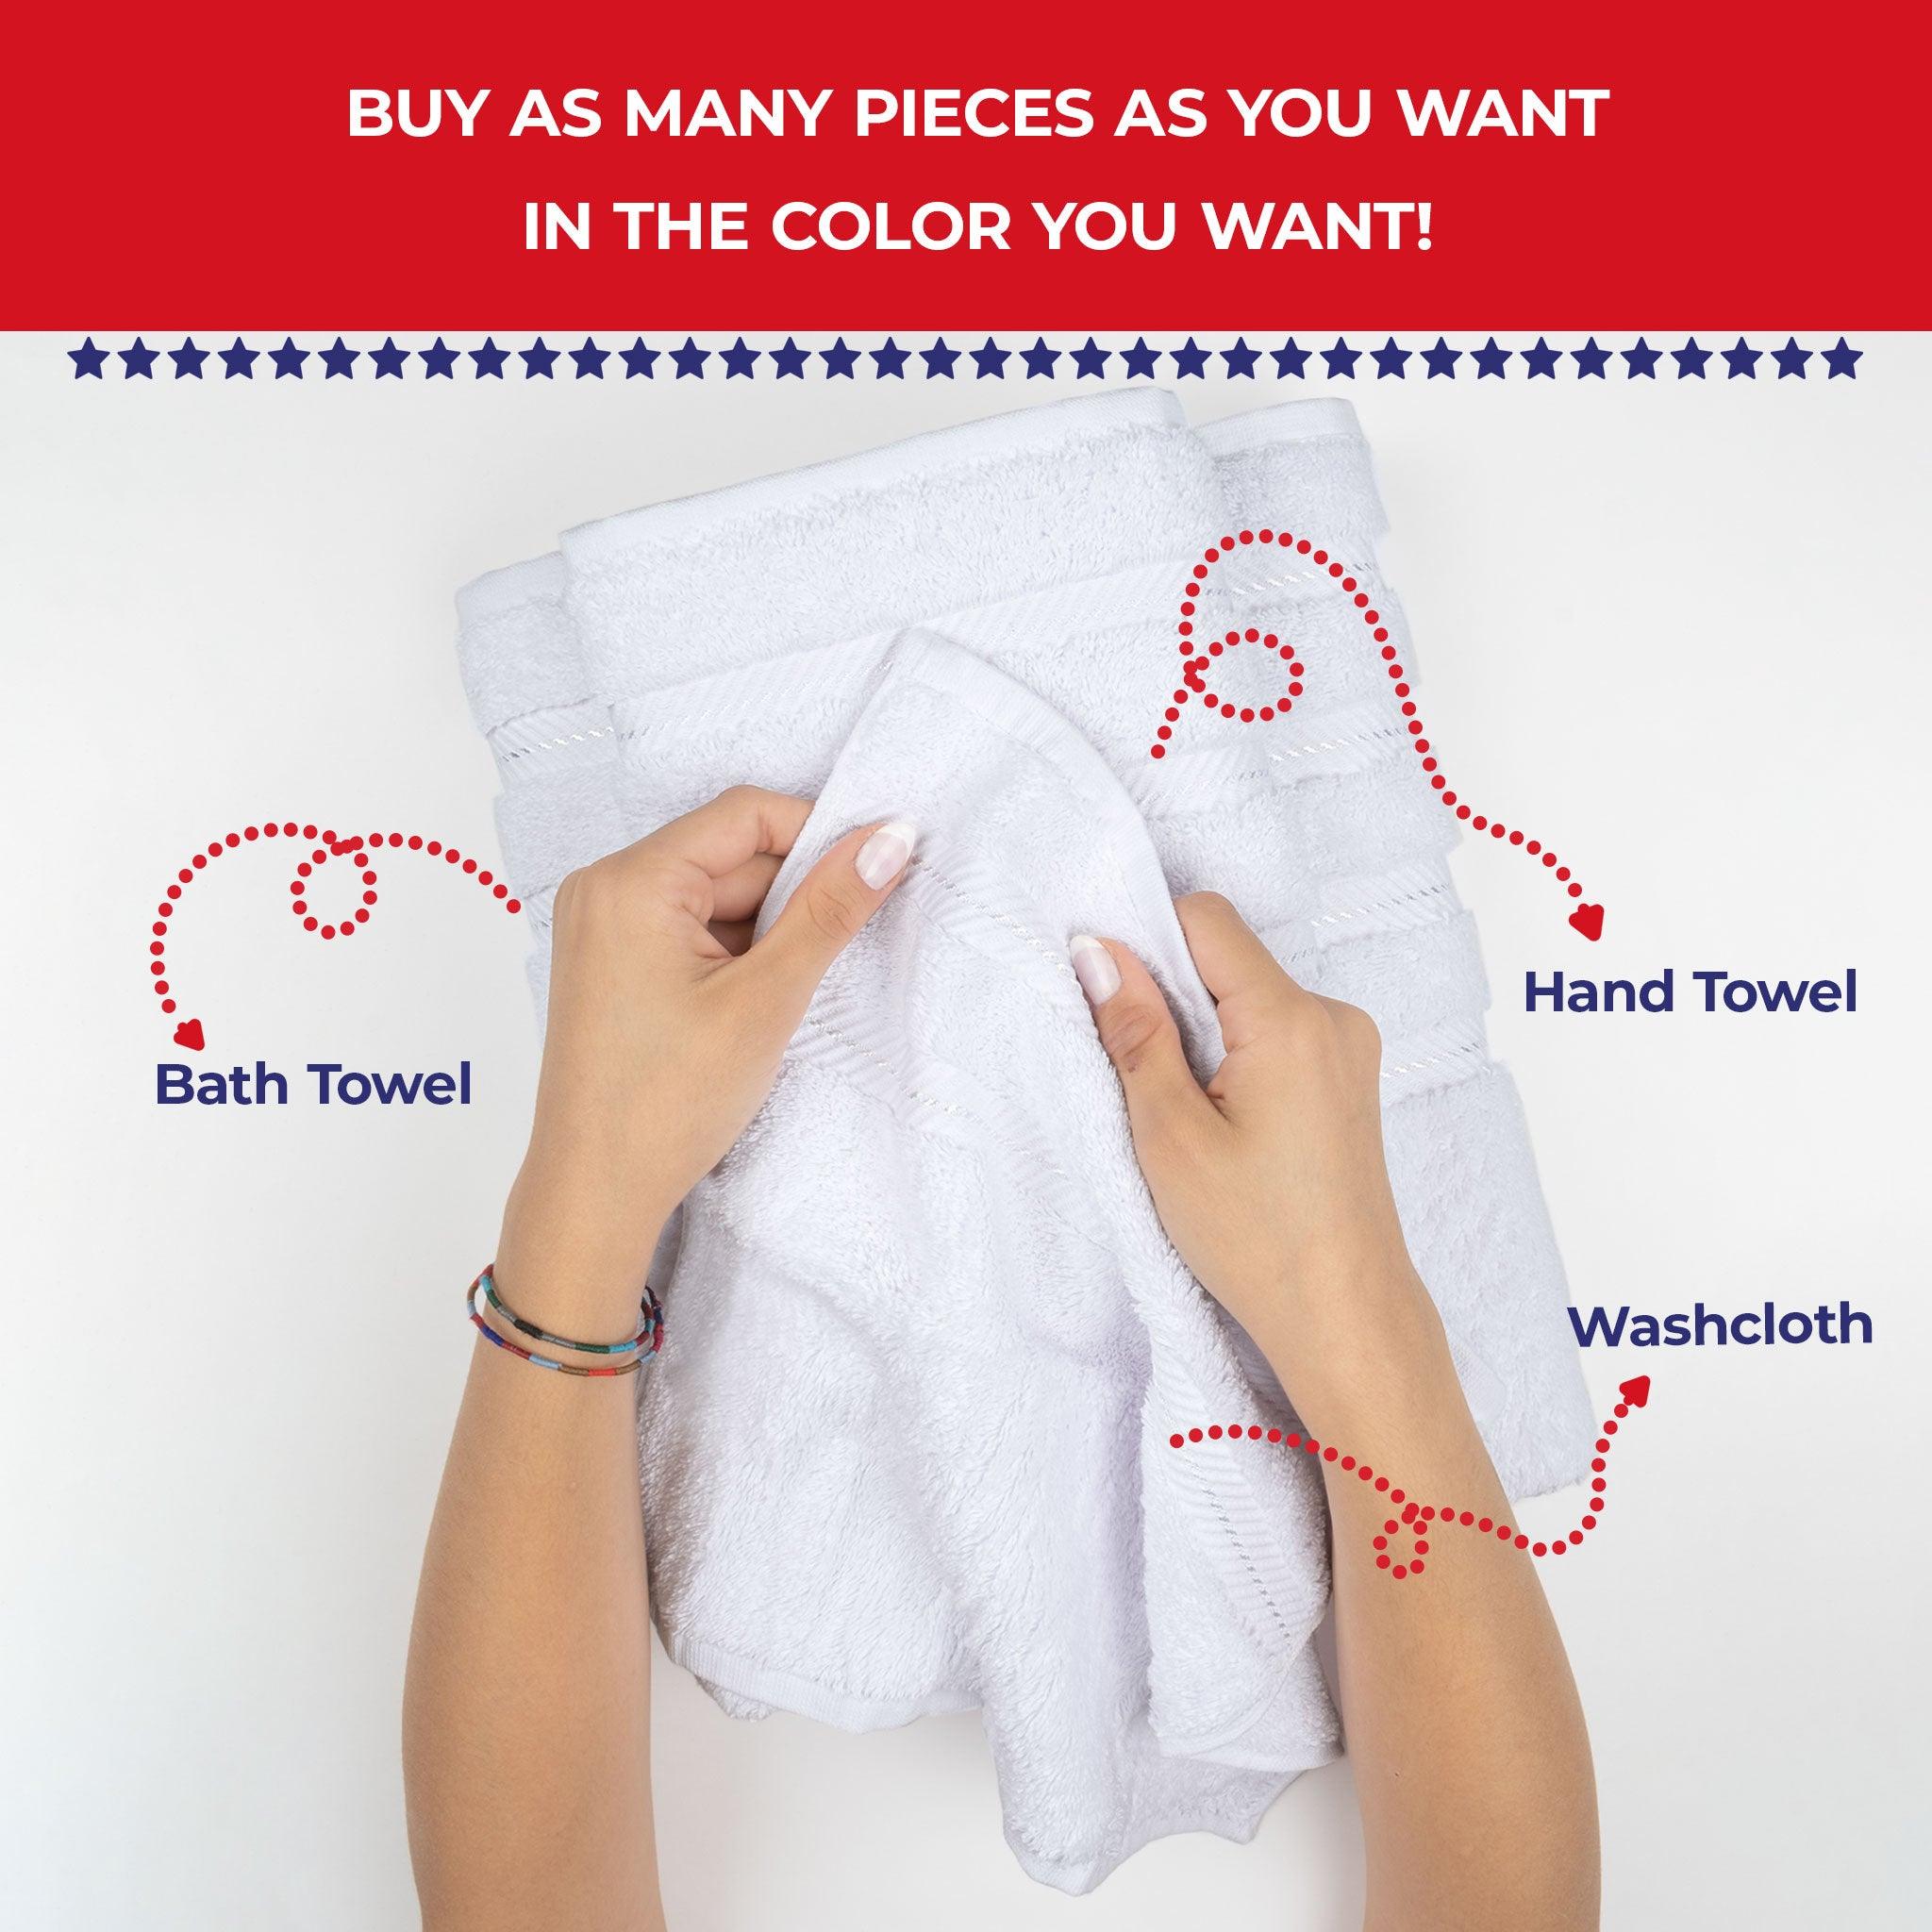 HAND TOWEL definition in American English